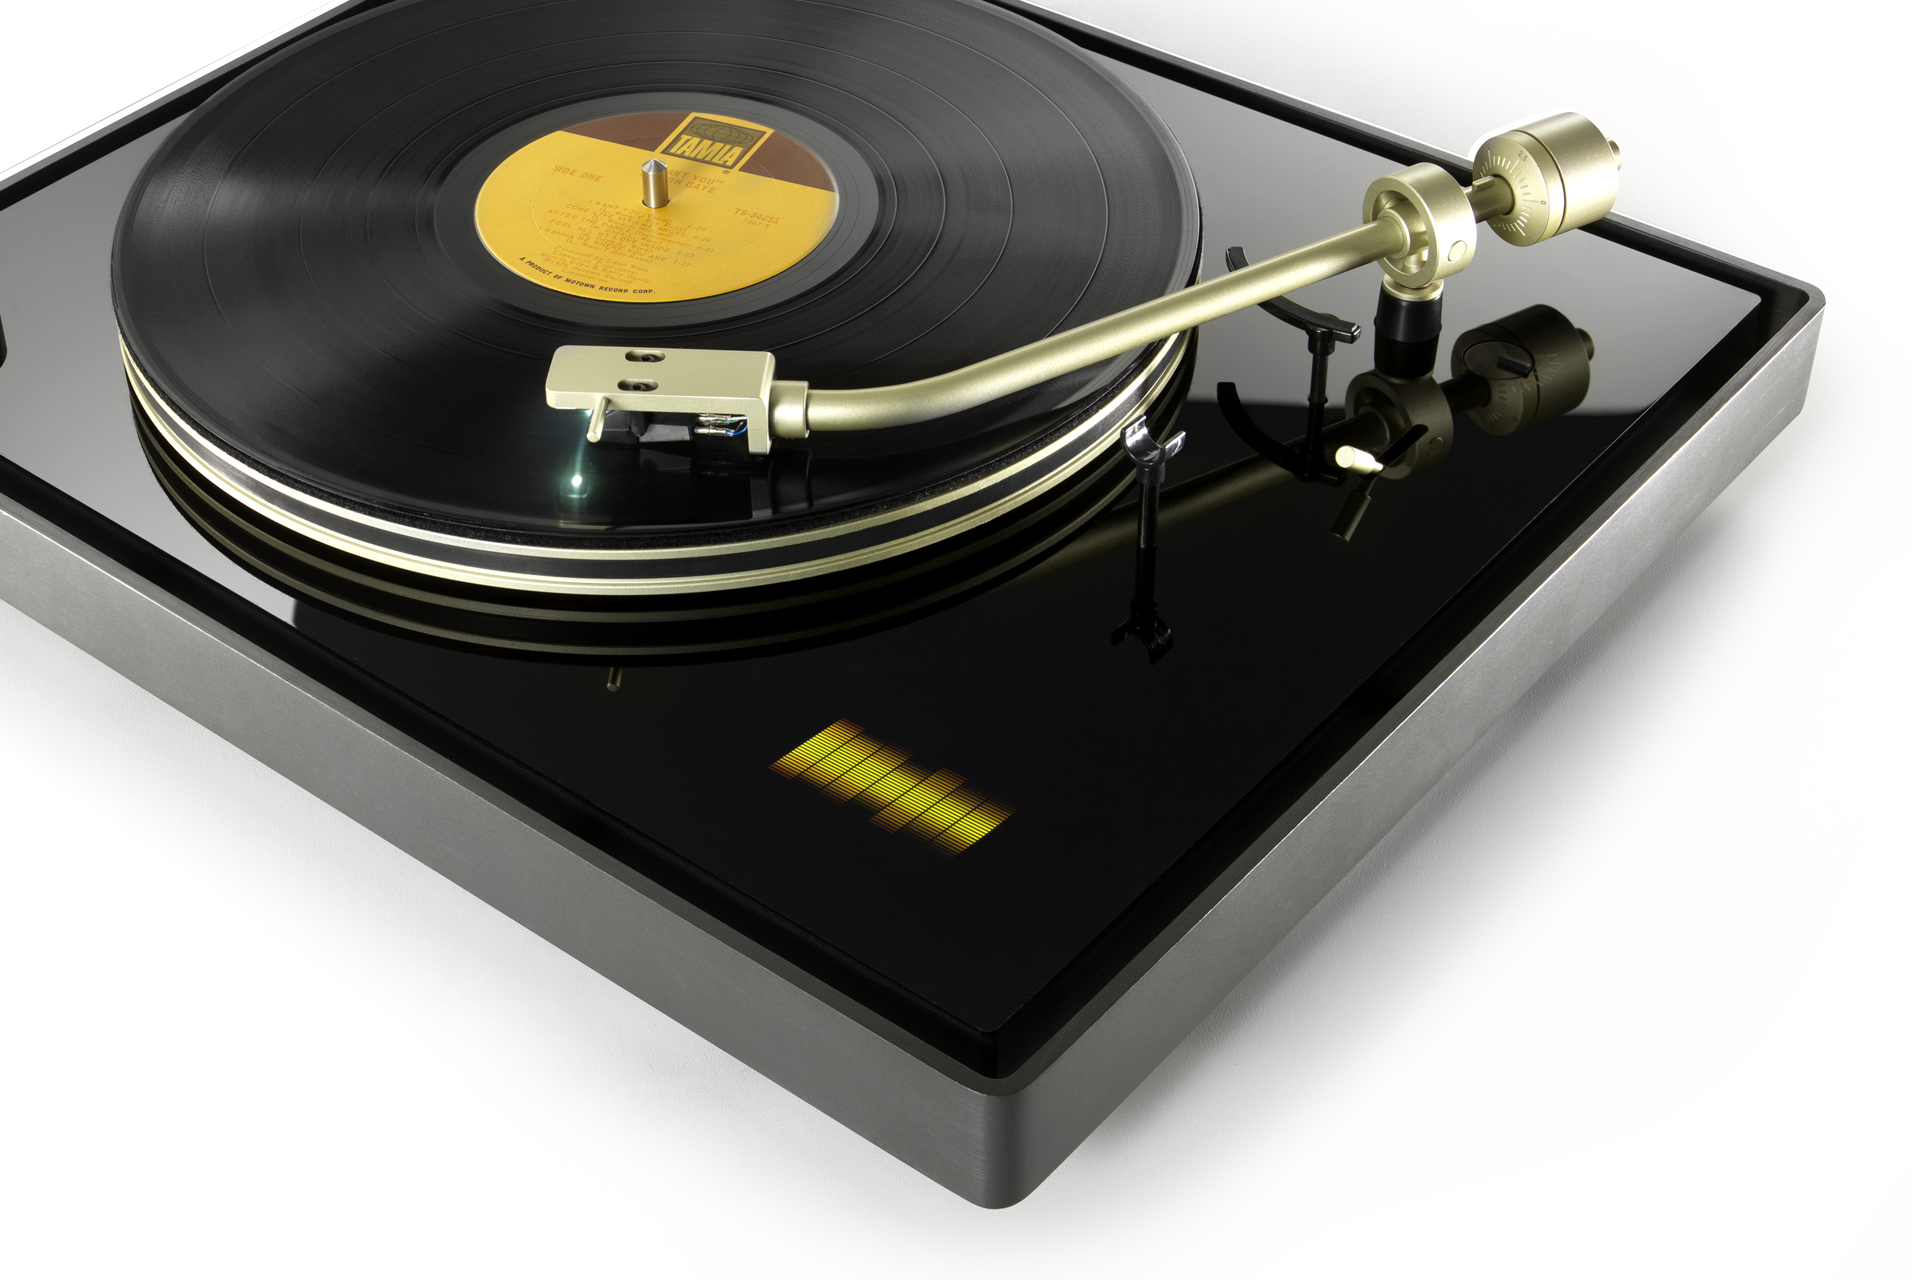 Black record player spinning a record, with a gold needle arm and a digital interface showing orange audio waves